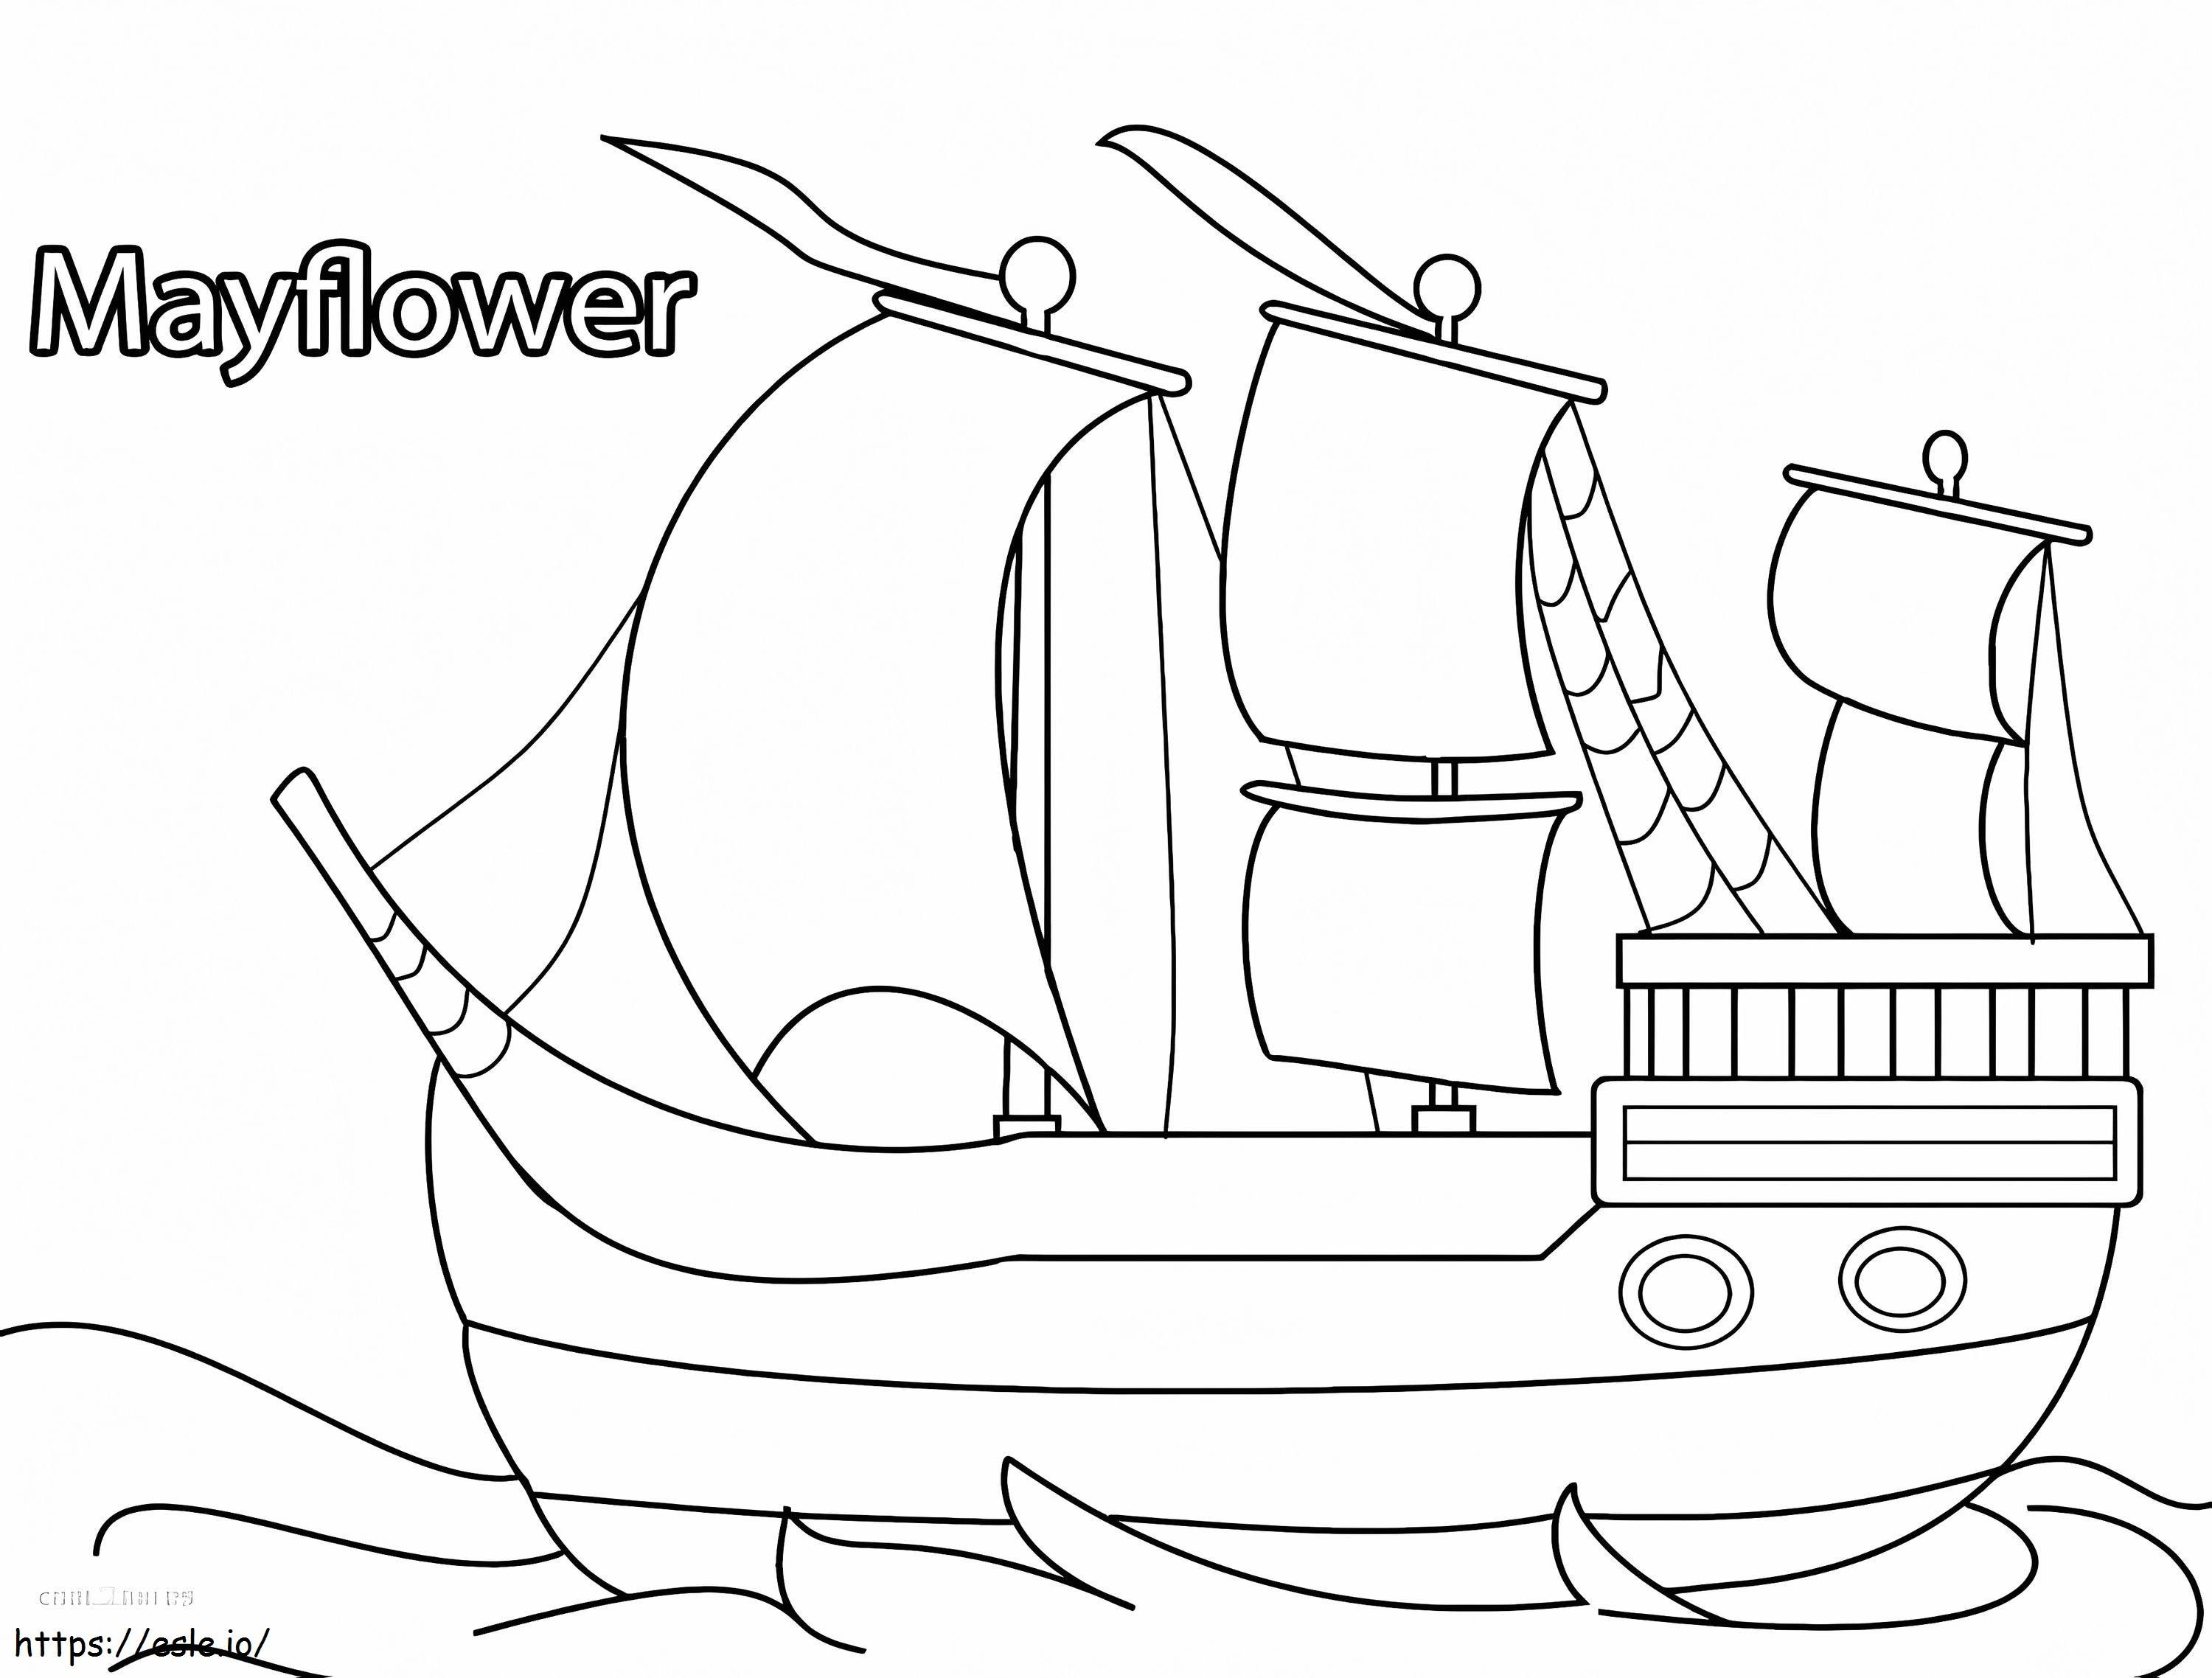 Mayflower 4 coloring page